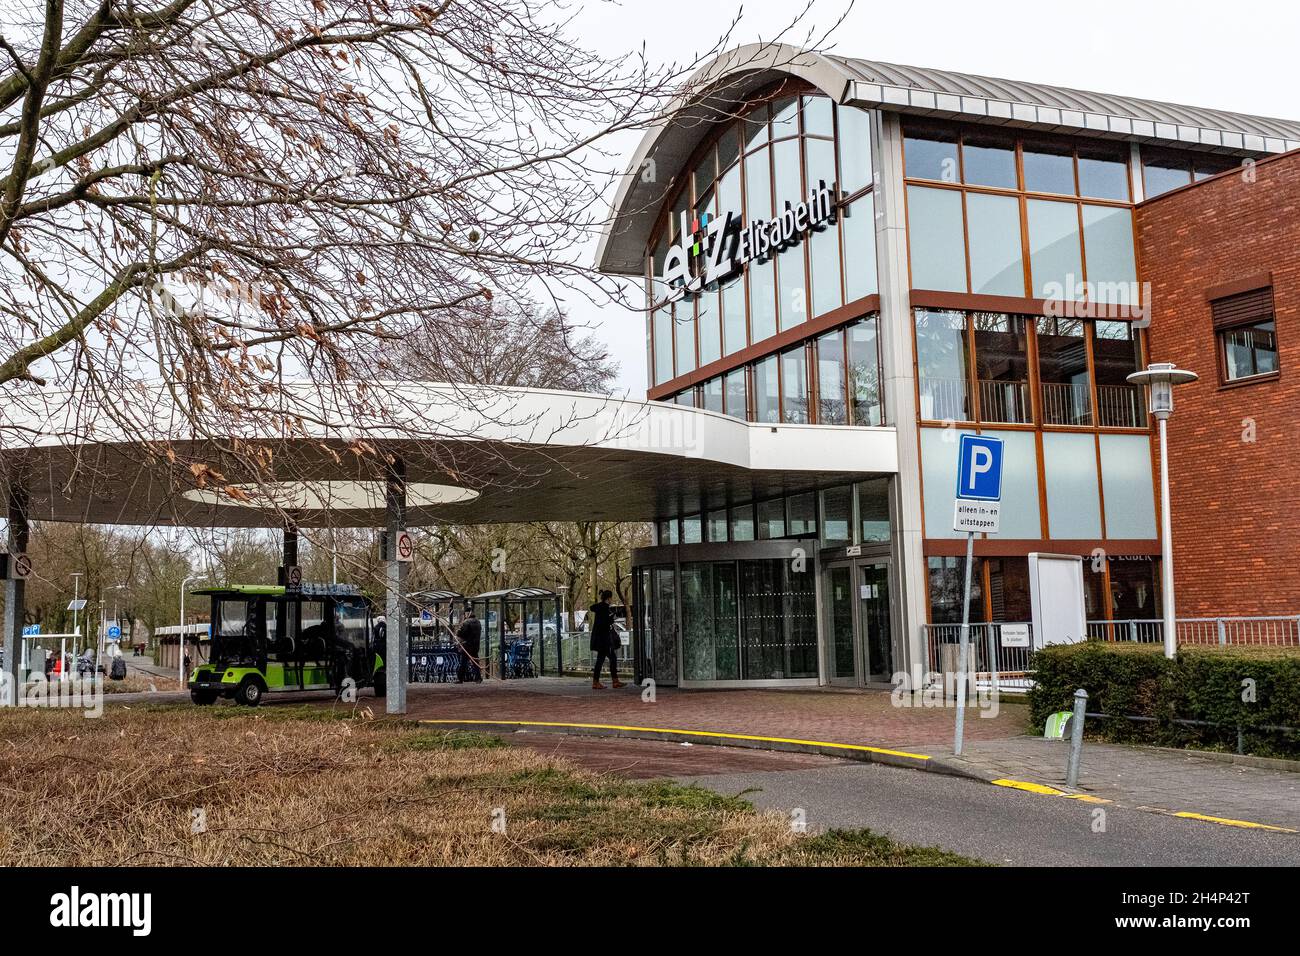 Tilburg, Netherlands. Main entrance of ETZ Elisabeth Hospital, where on wednesday, February 26, 2020 the first Dutch Corona / COVID-19 Patient from Loon op Zand was submitted into quarataine for treatment of the virus. Stock Photo